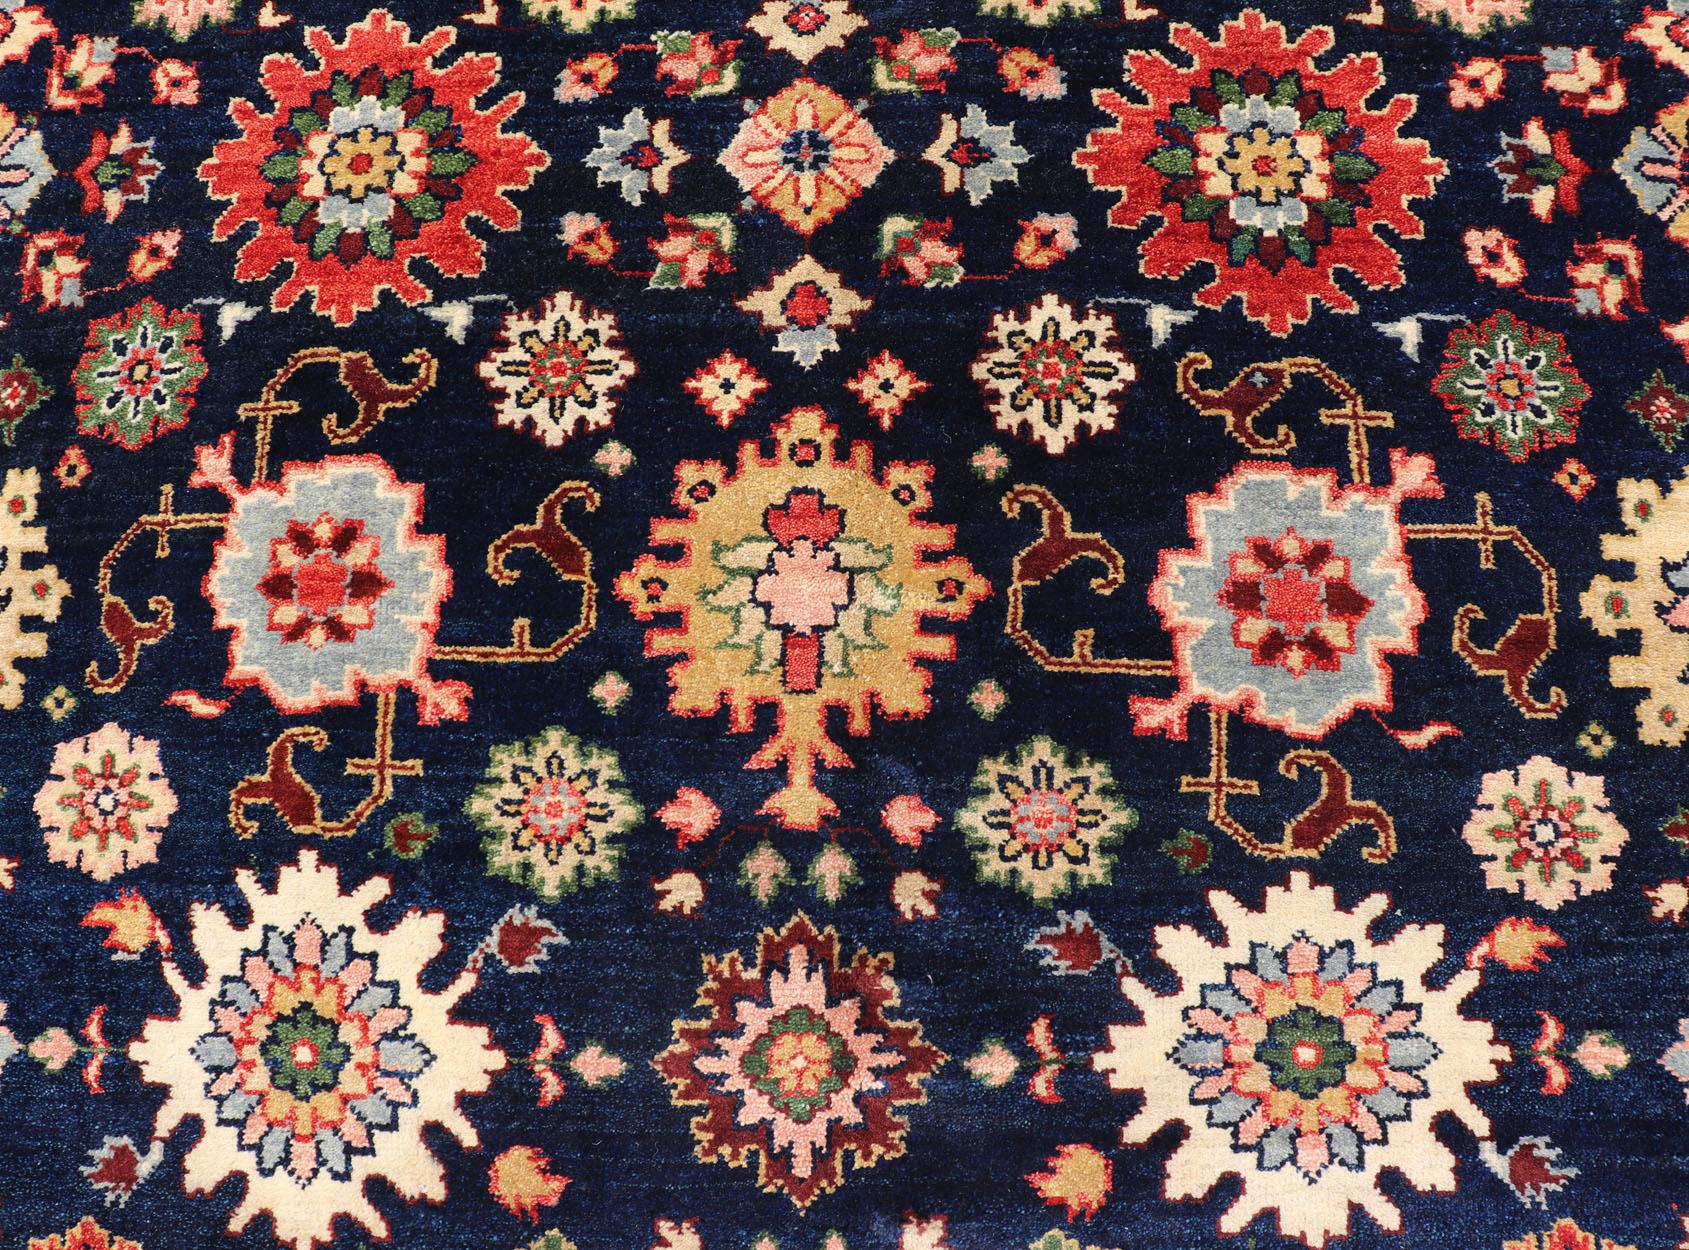 Indian Keivan Woven Arts Sultanabad-Mahal Design in All-Over Floral Hand-Knotted Carpet For Sale